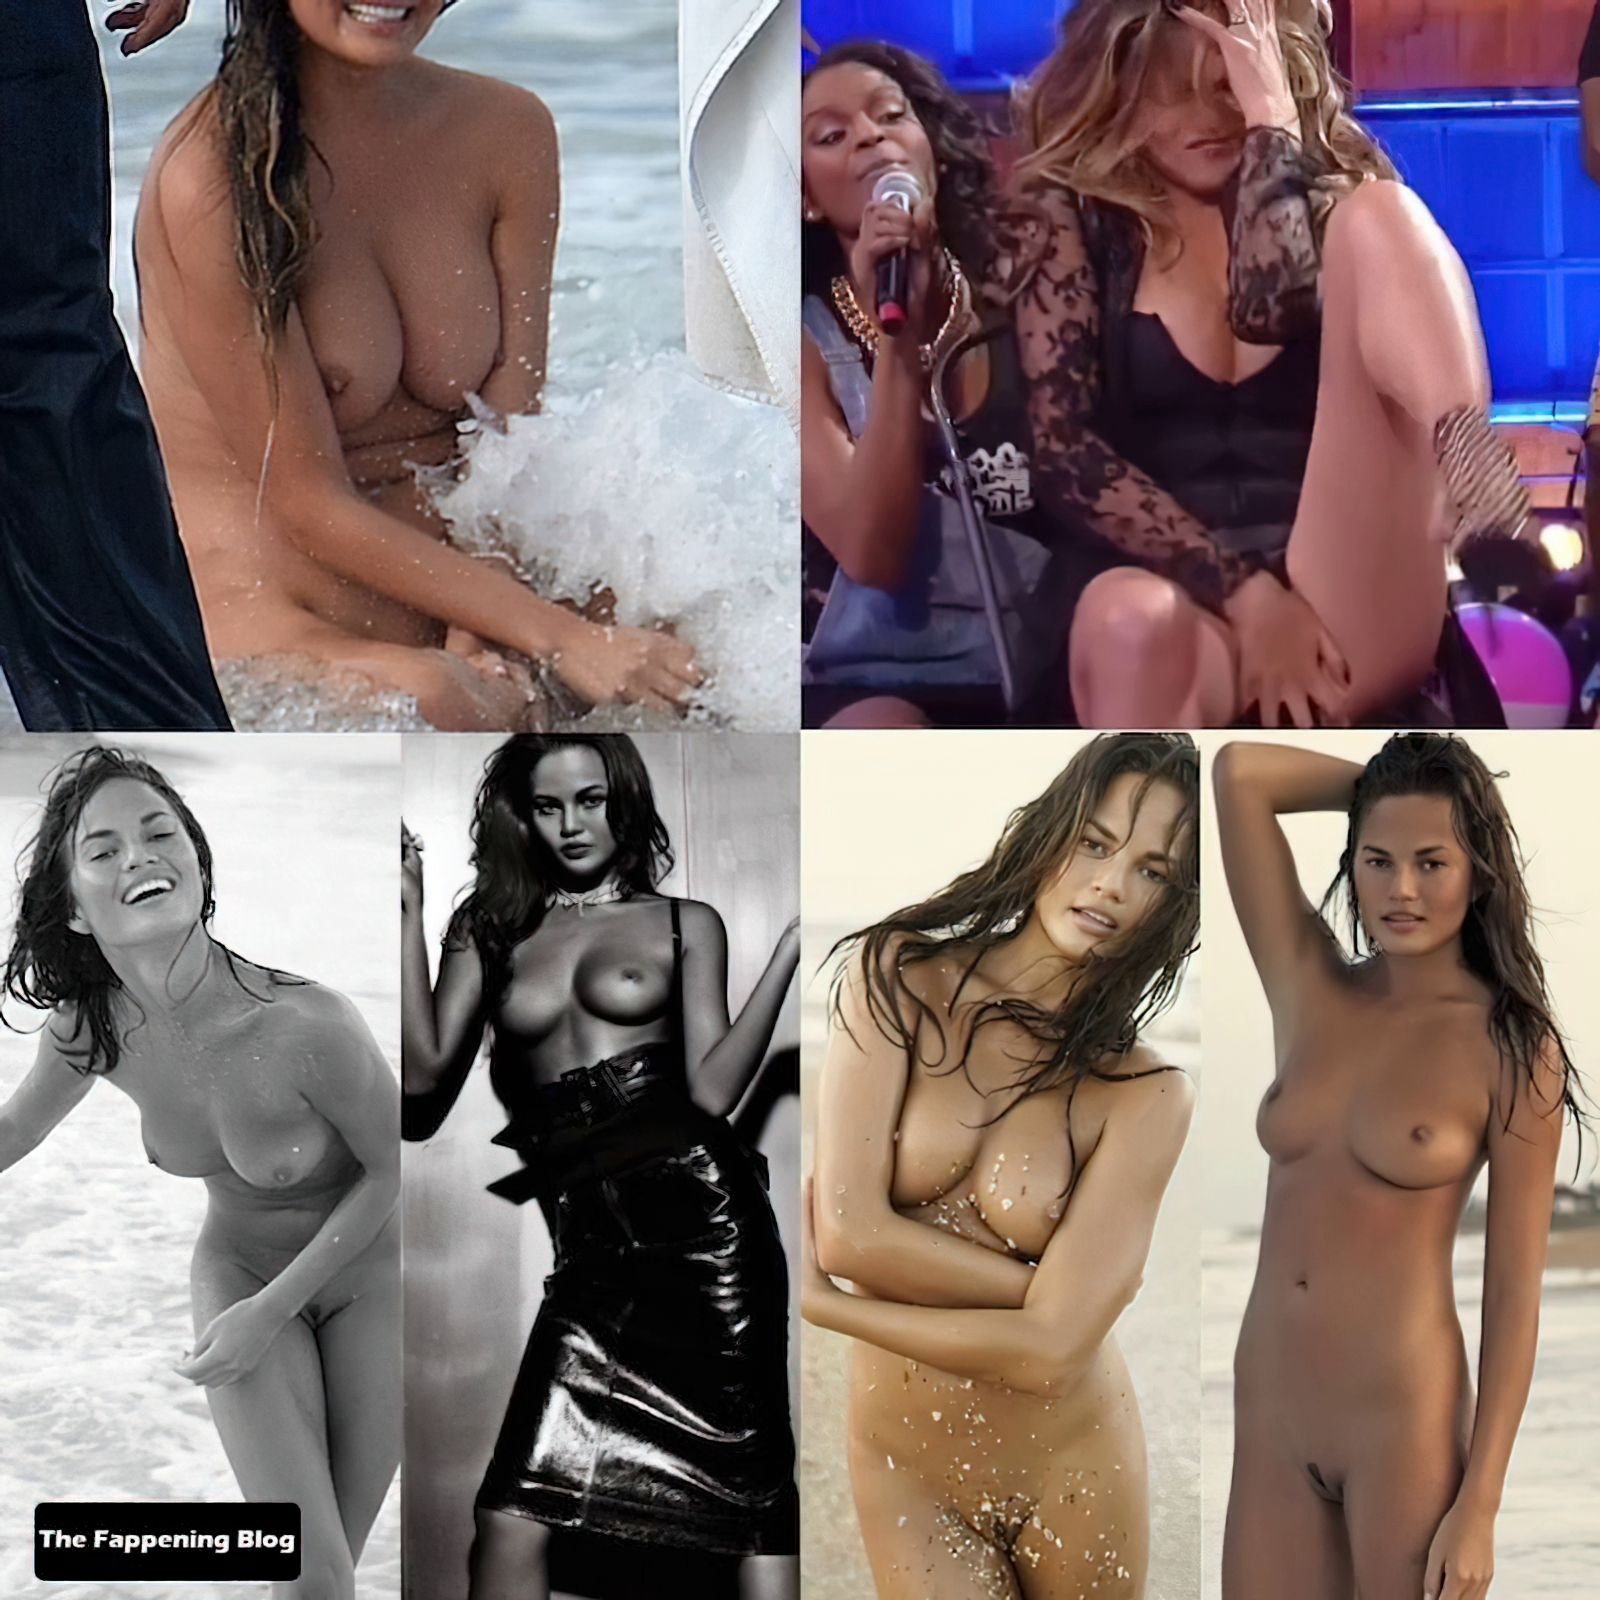 Chrissy Teigen Naked Photos - All the Times That Chrissy Teigen Went Nude  For the Camera Are Enough to Make You Blush